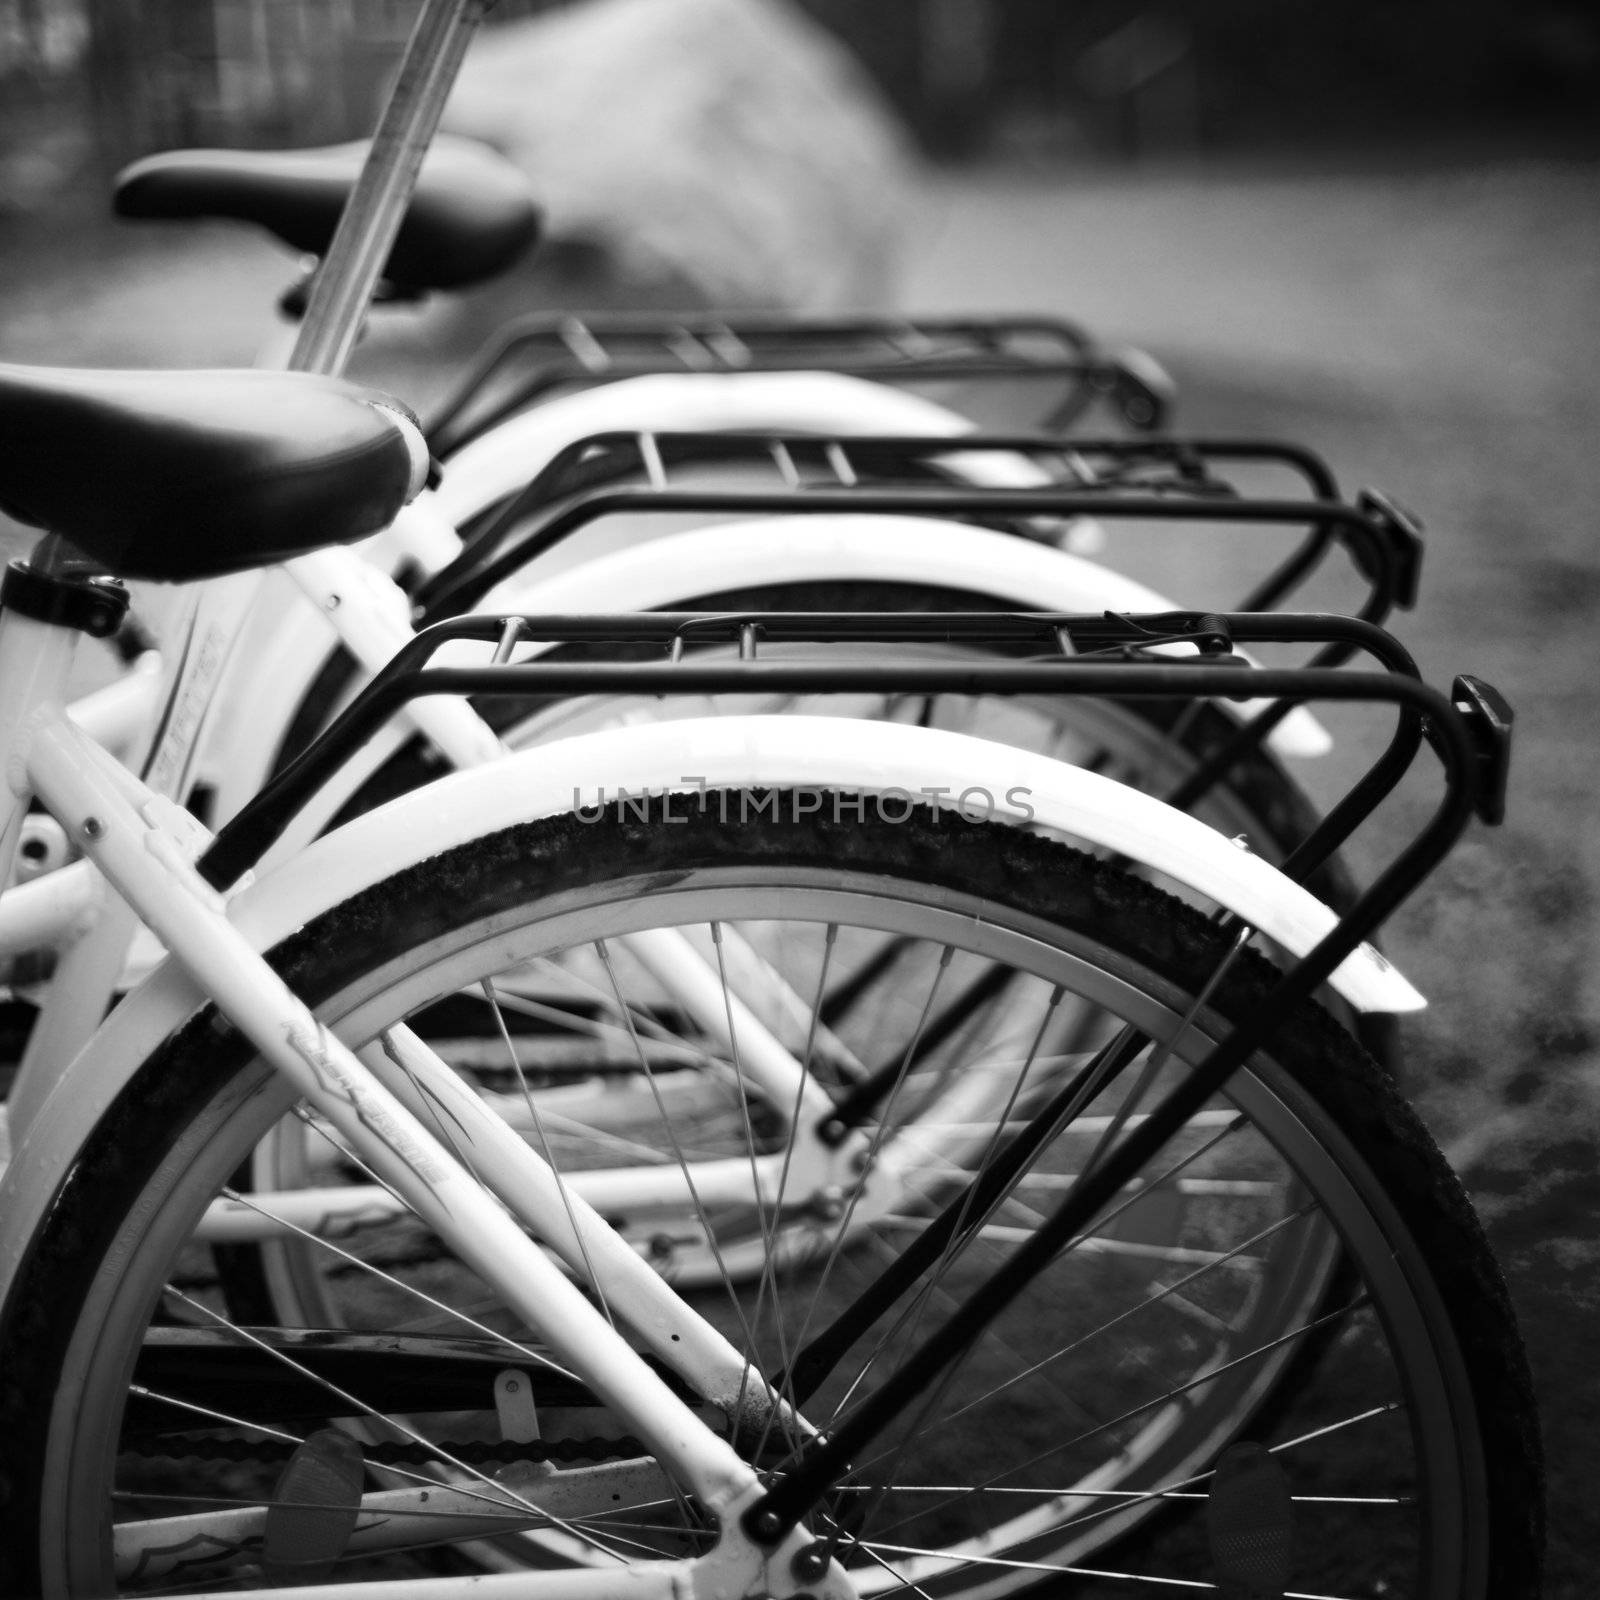 bicycles by Yellowj